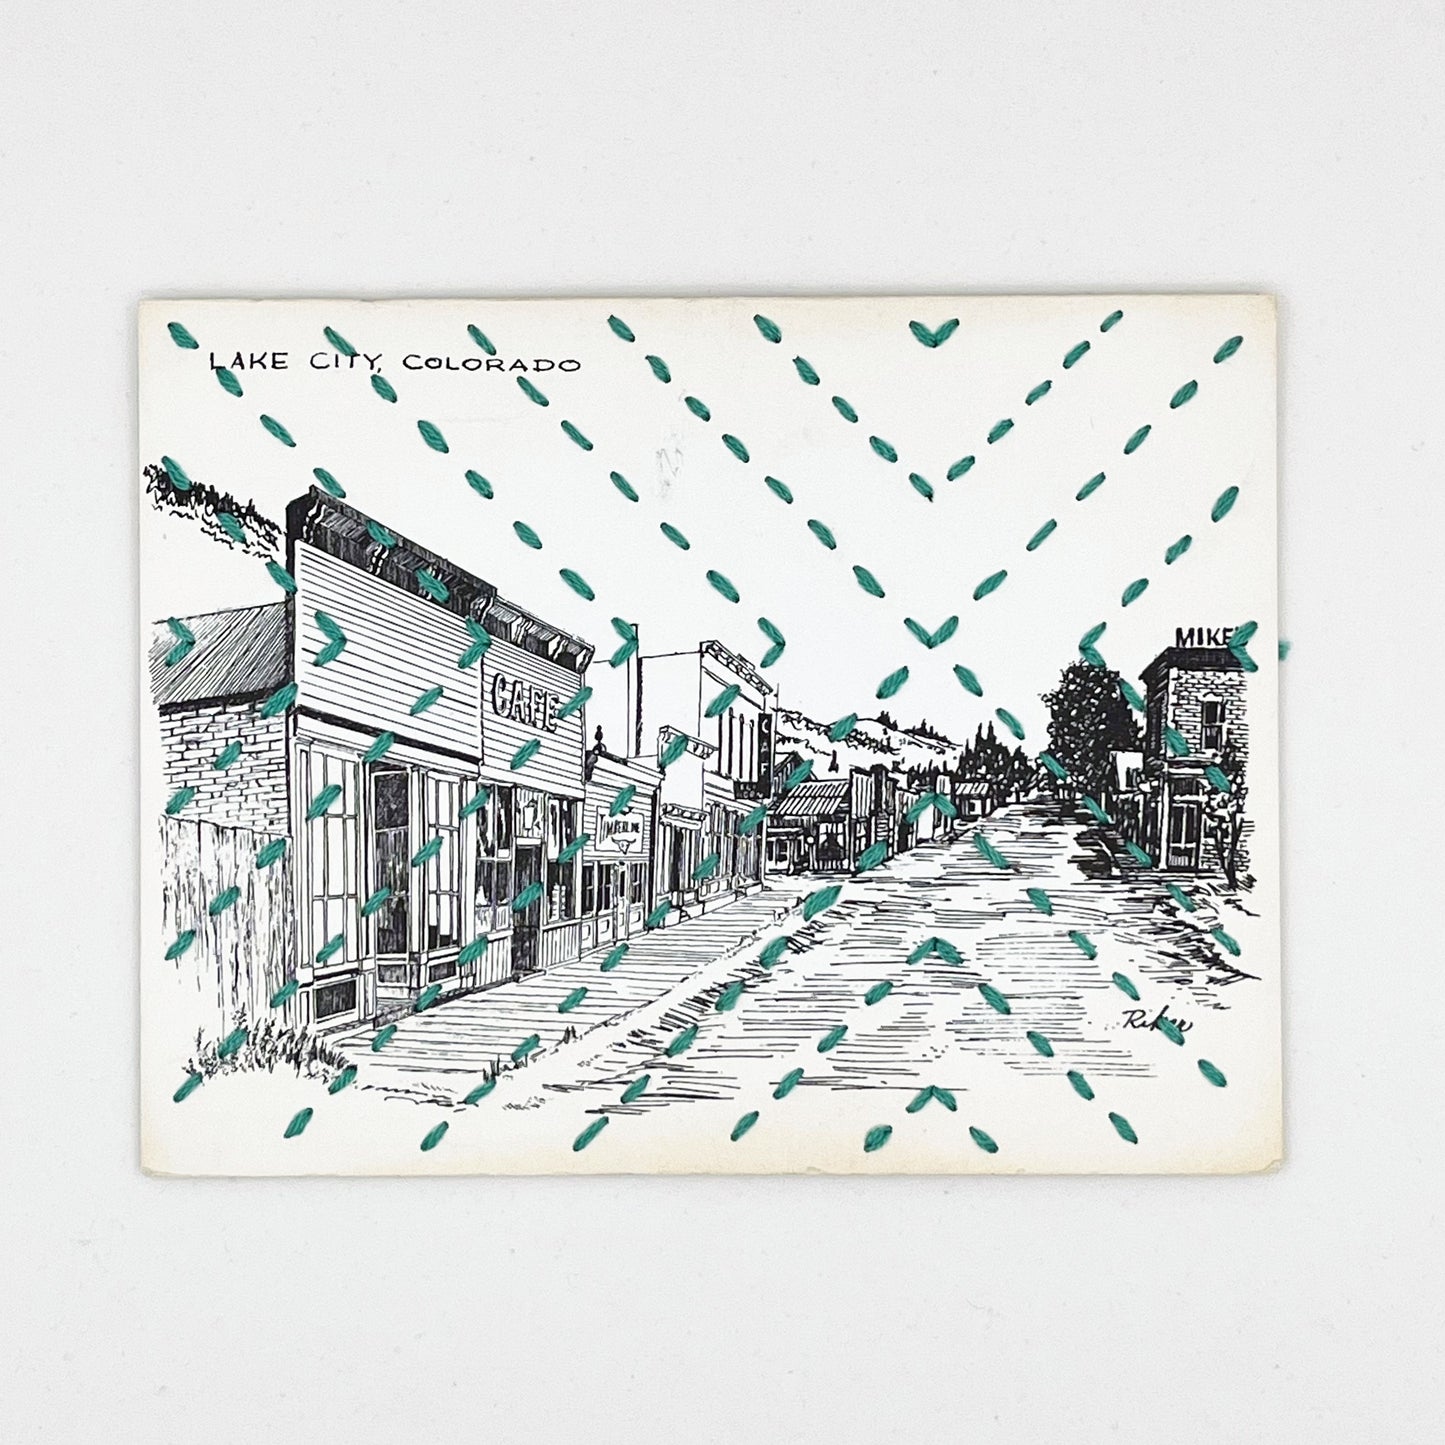 a vintage postcard with a line drawing of Lake City Colorado, hand stitched with a radiating X in green floss